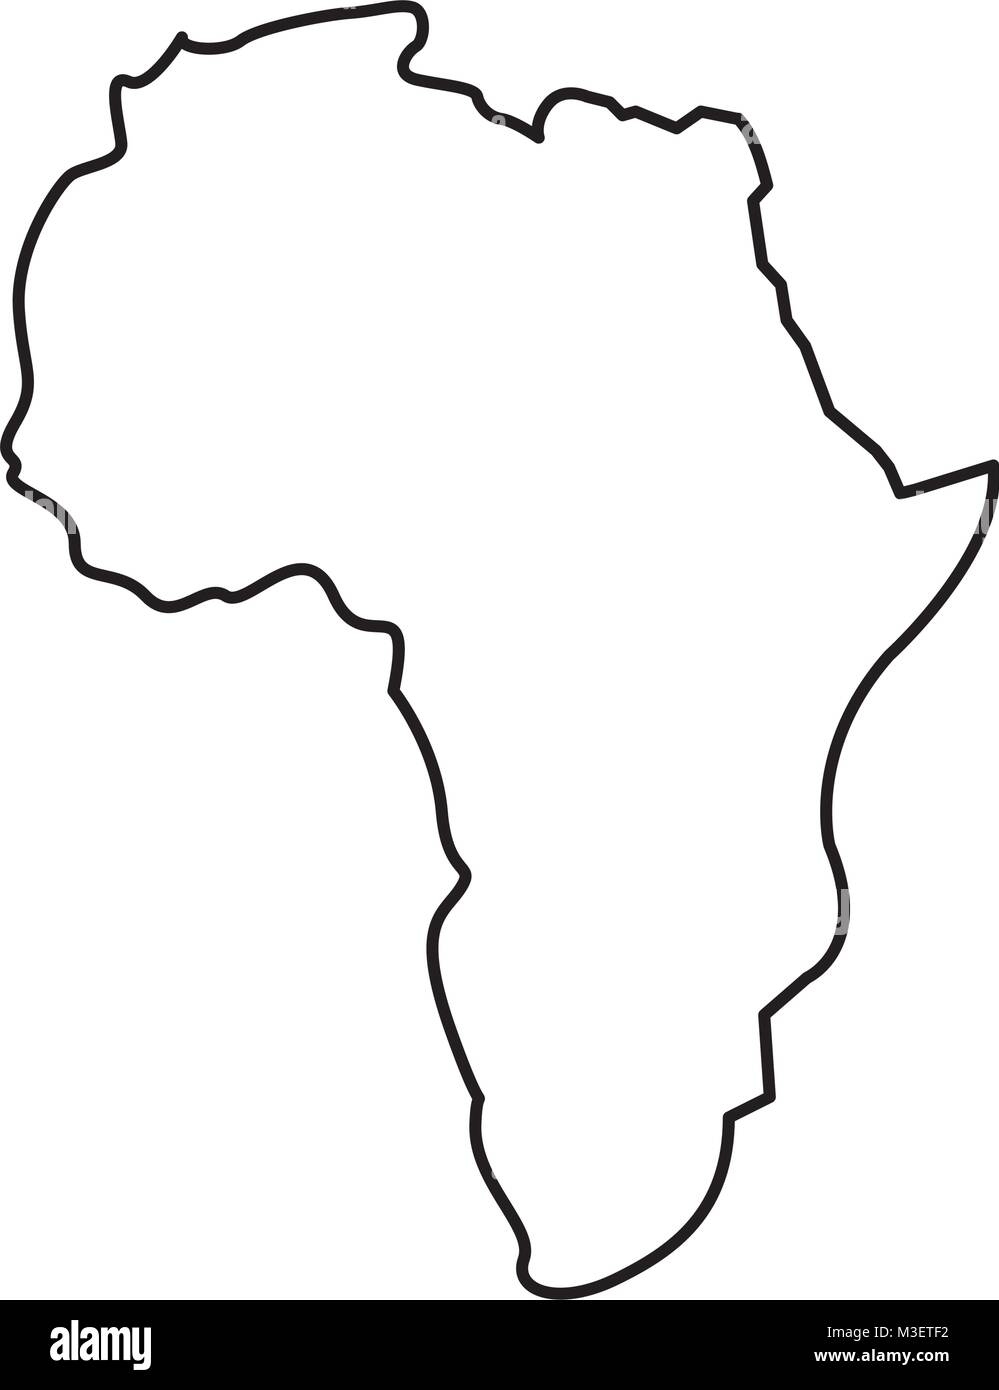 map of africa continent silhouette on a white background Stock Vector